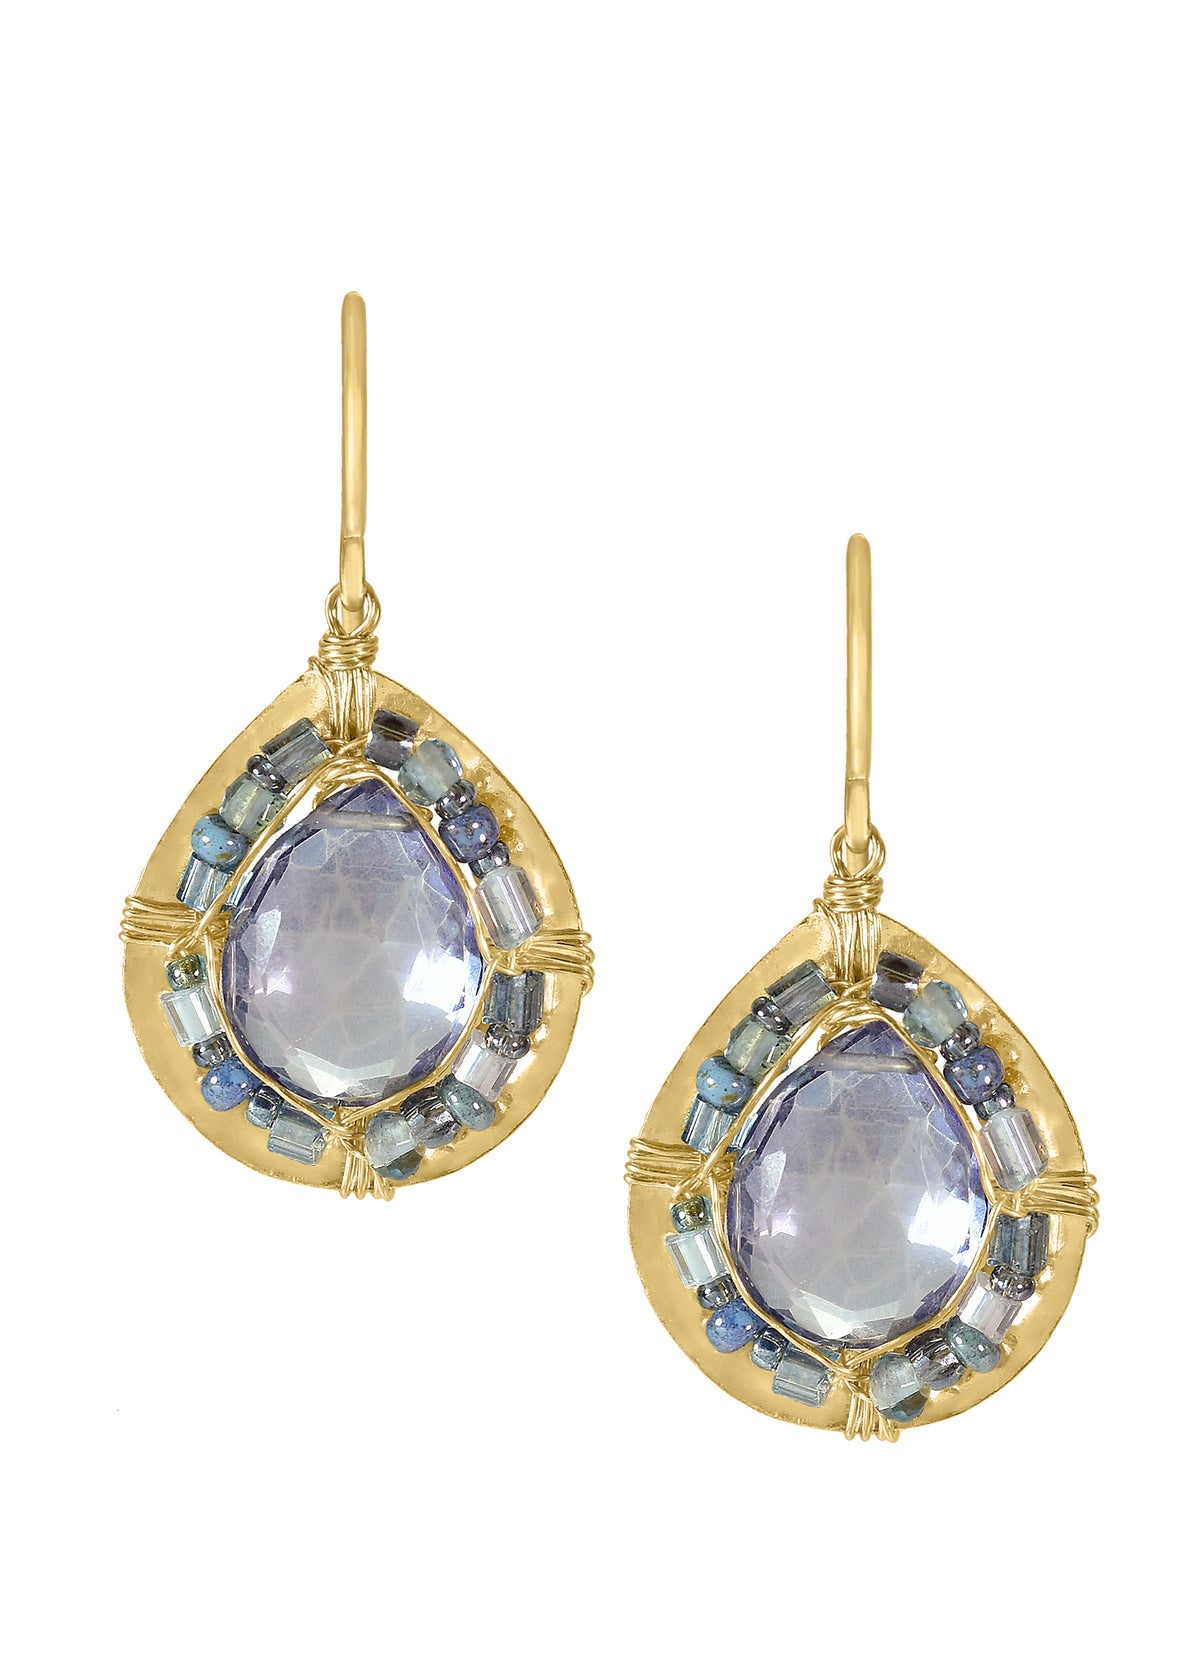 Blue quartz Seed beads 14k gold fill Earrings measure 1-3/16&quot; in length (including the ear wires) and 11/16&quot; in width at the widest point Handmade in our Los Angeles studio